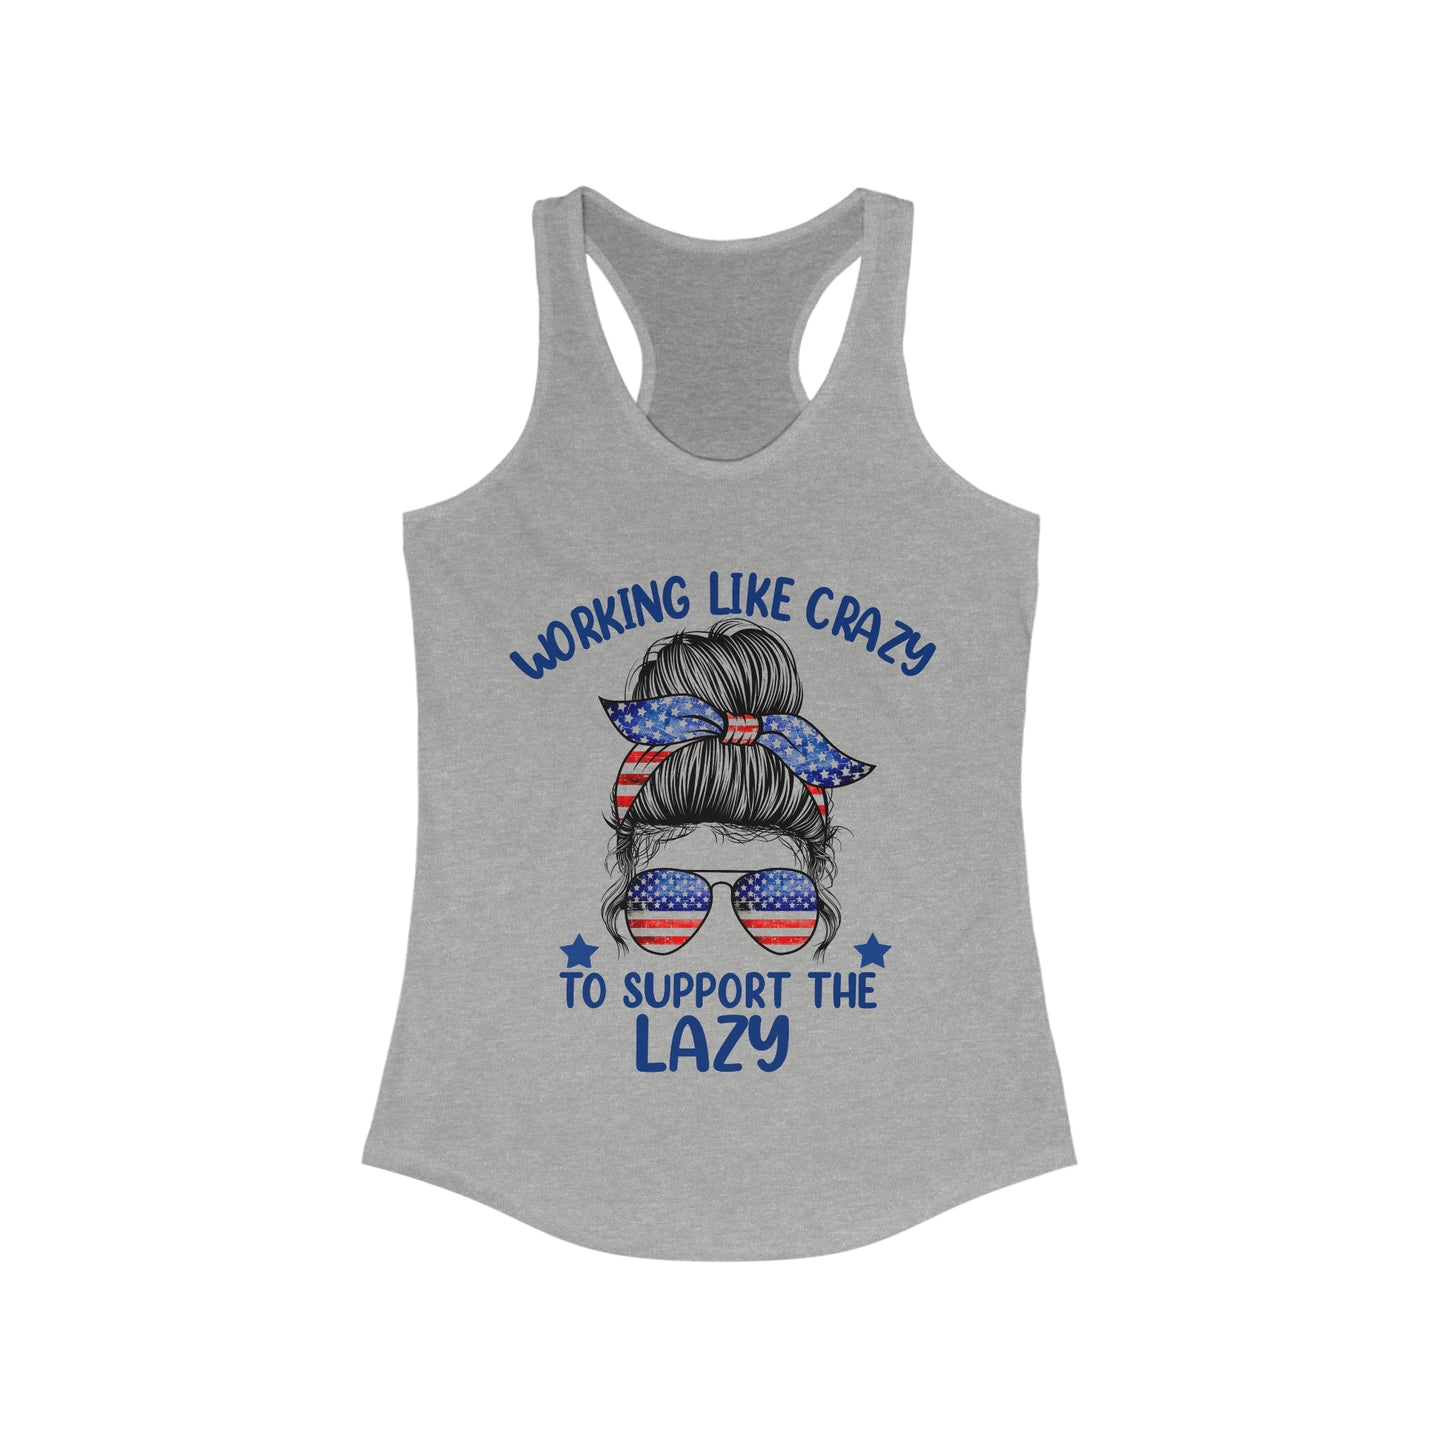 Working Like Crazy To Support The Lazy Tank Top